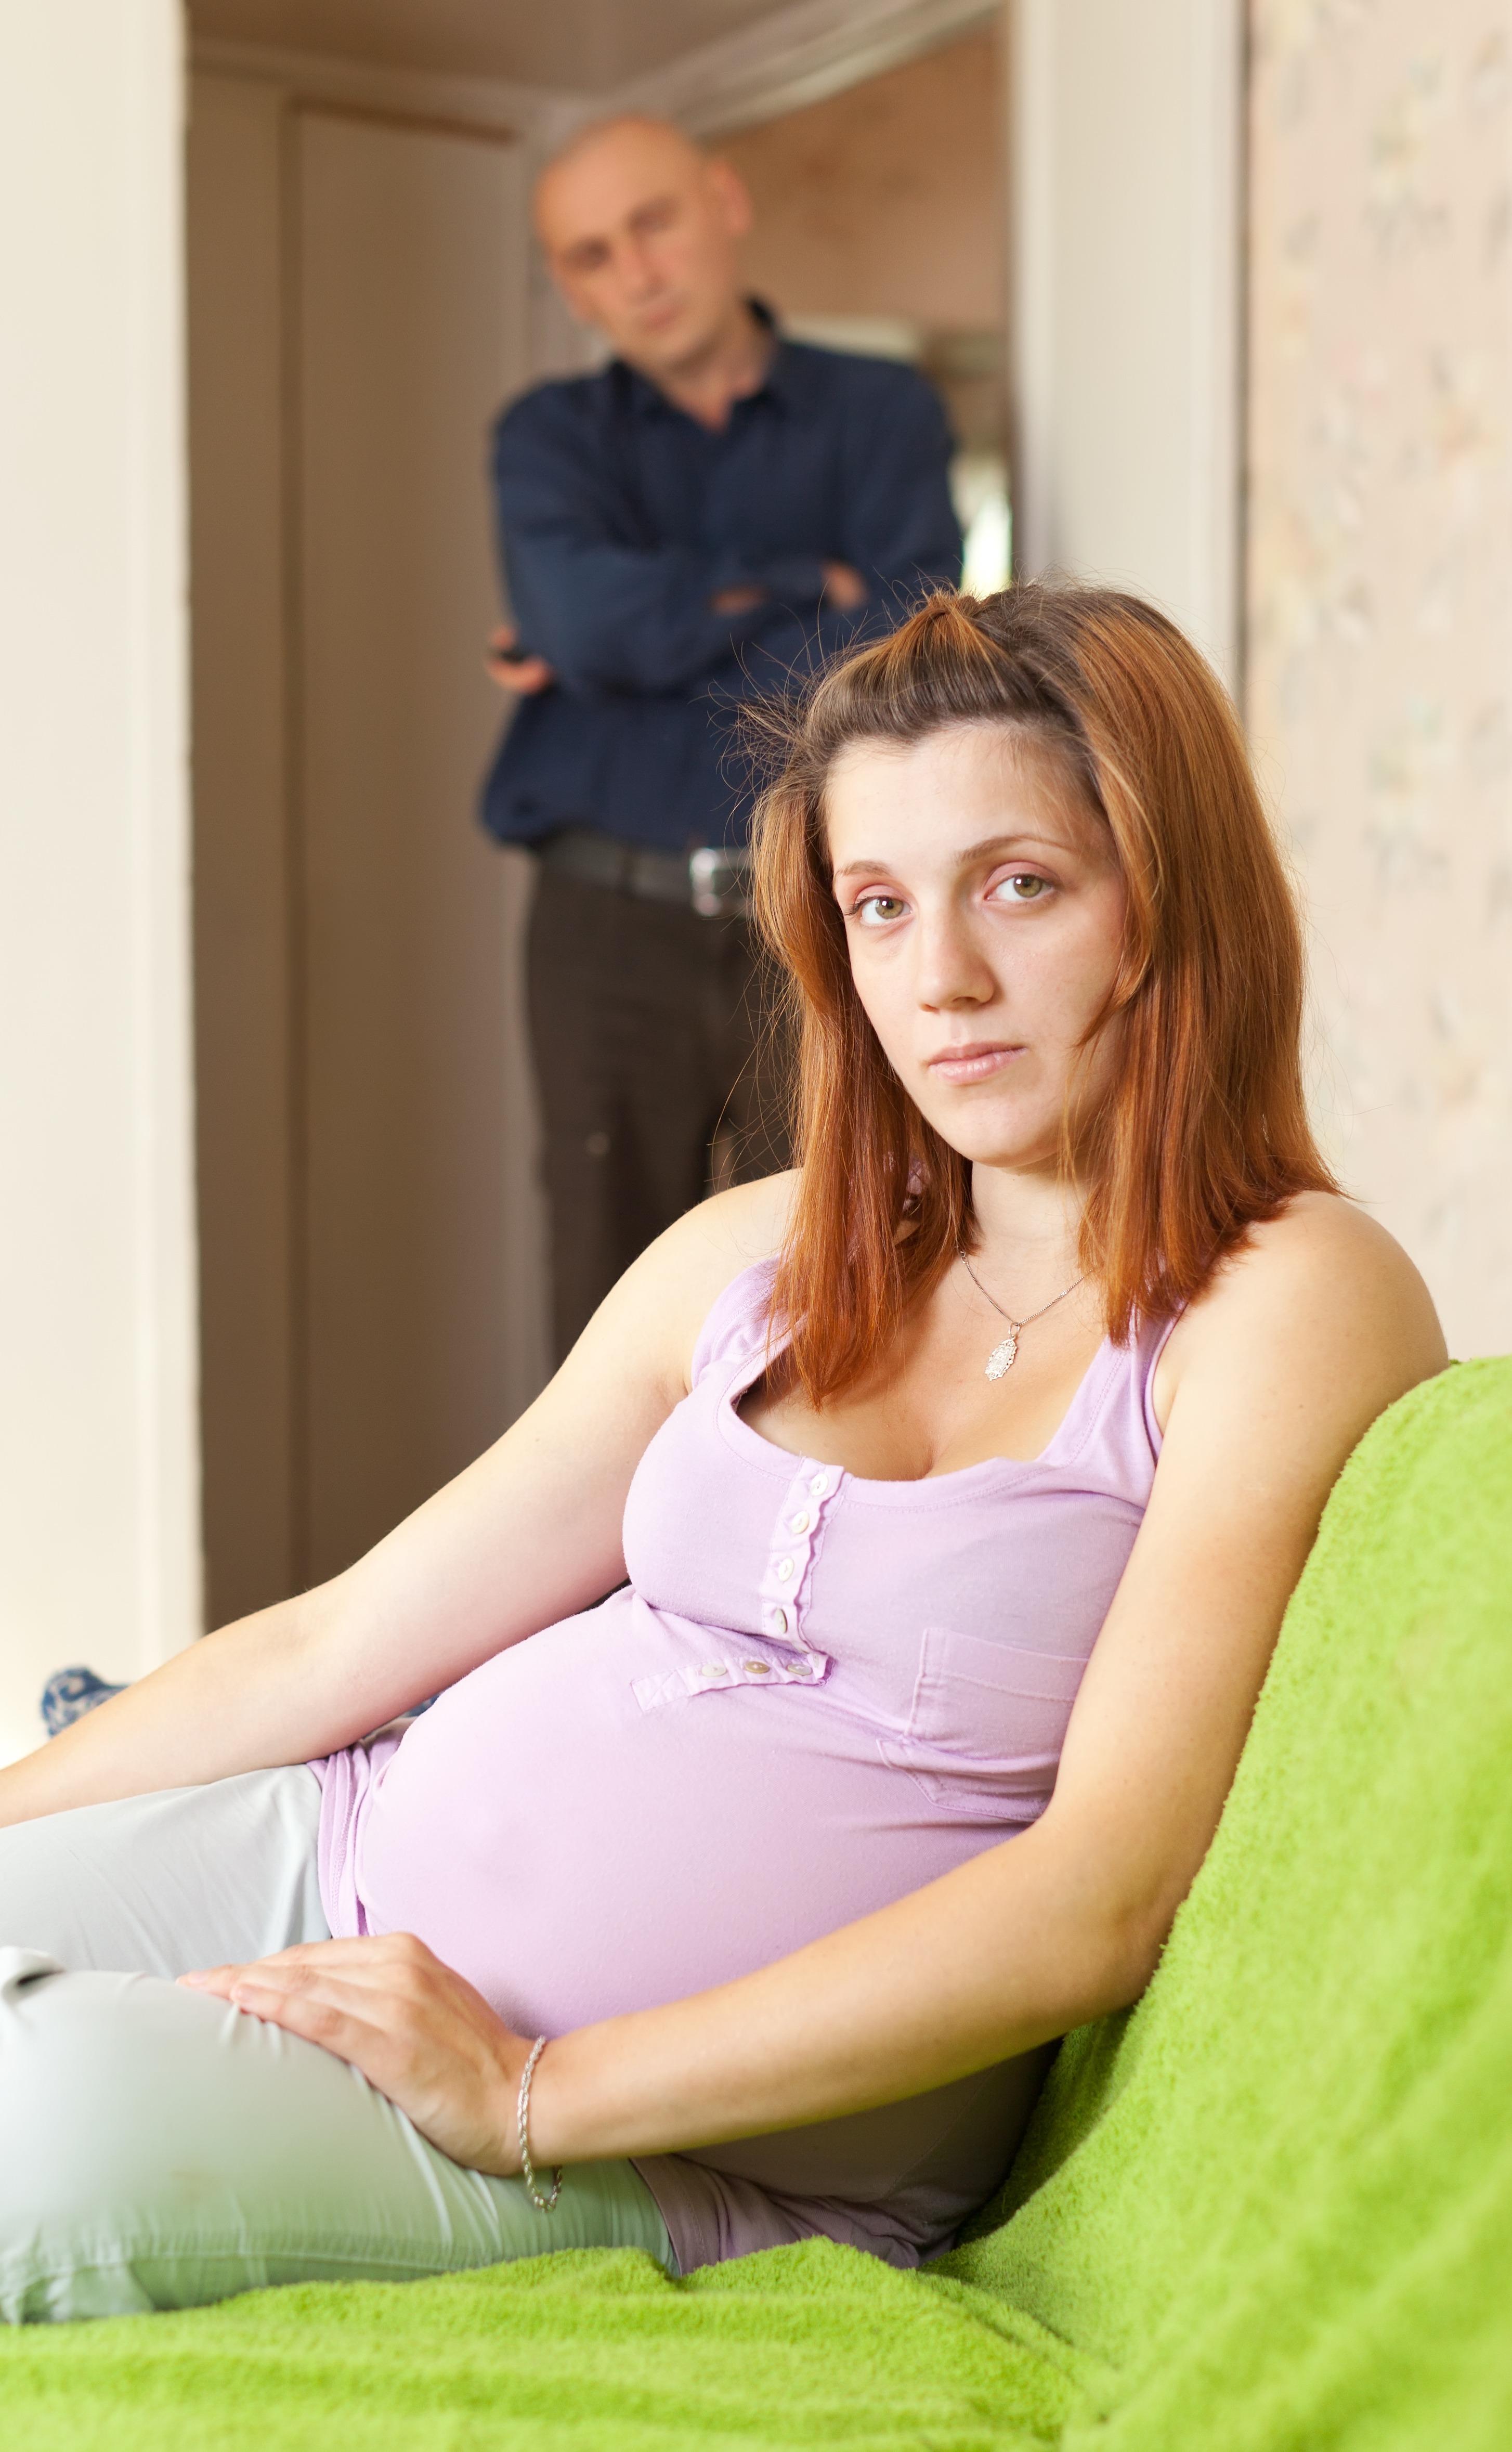 A pregnant woman with a man standing behind her | Source: Shutterstock